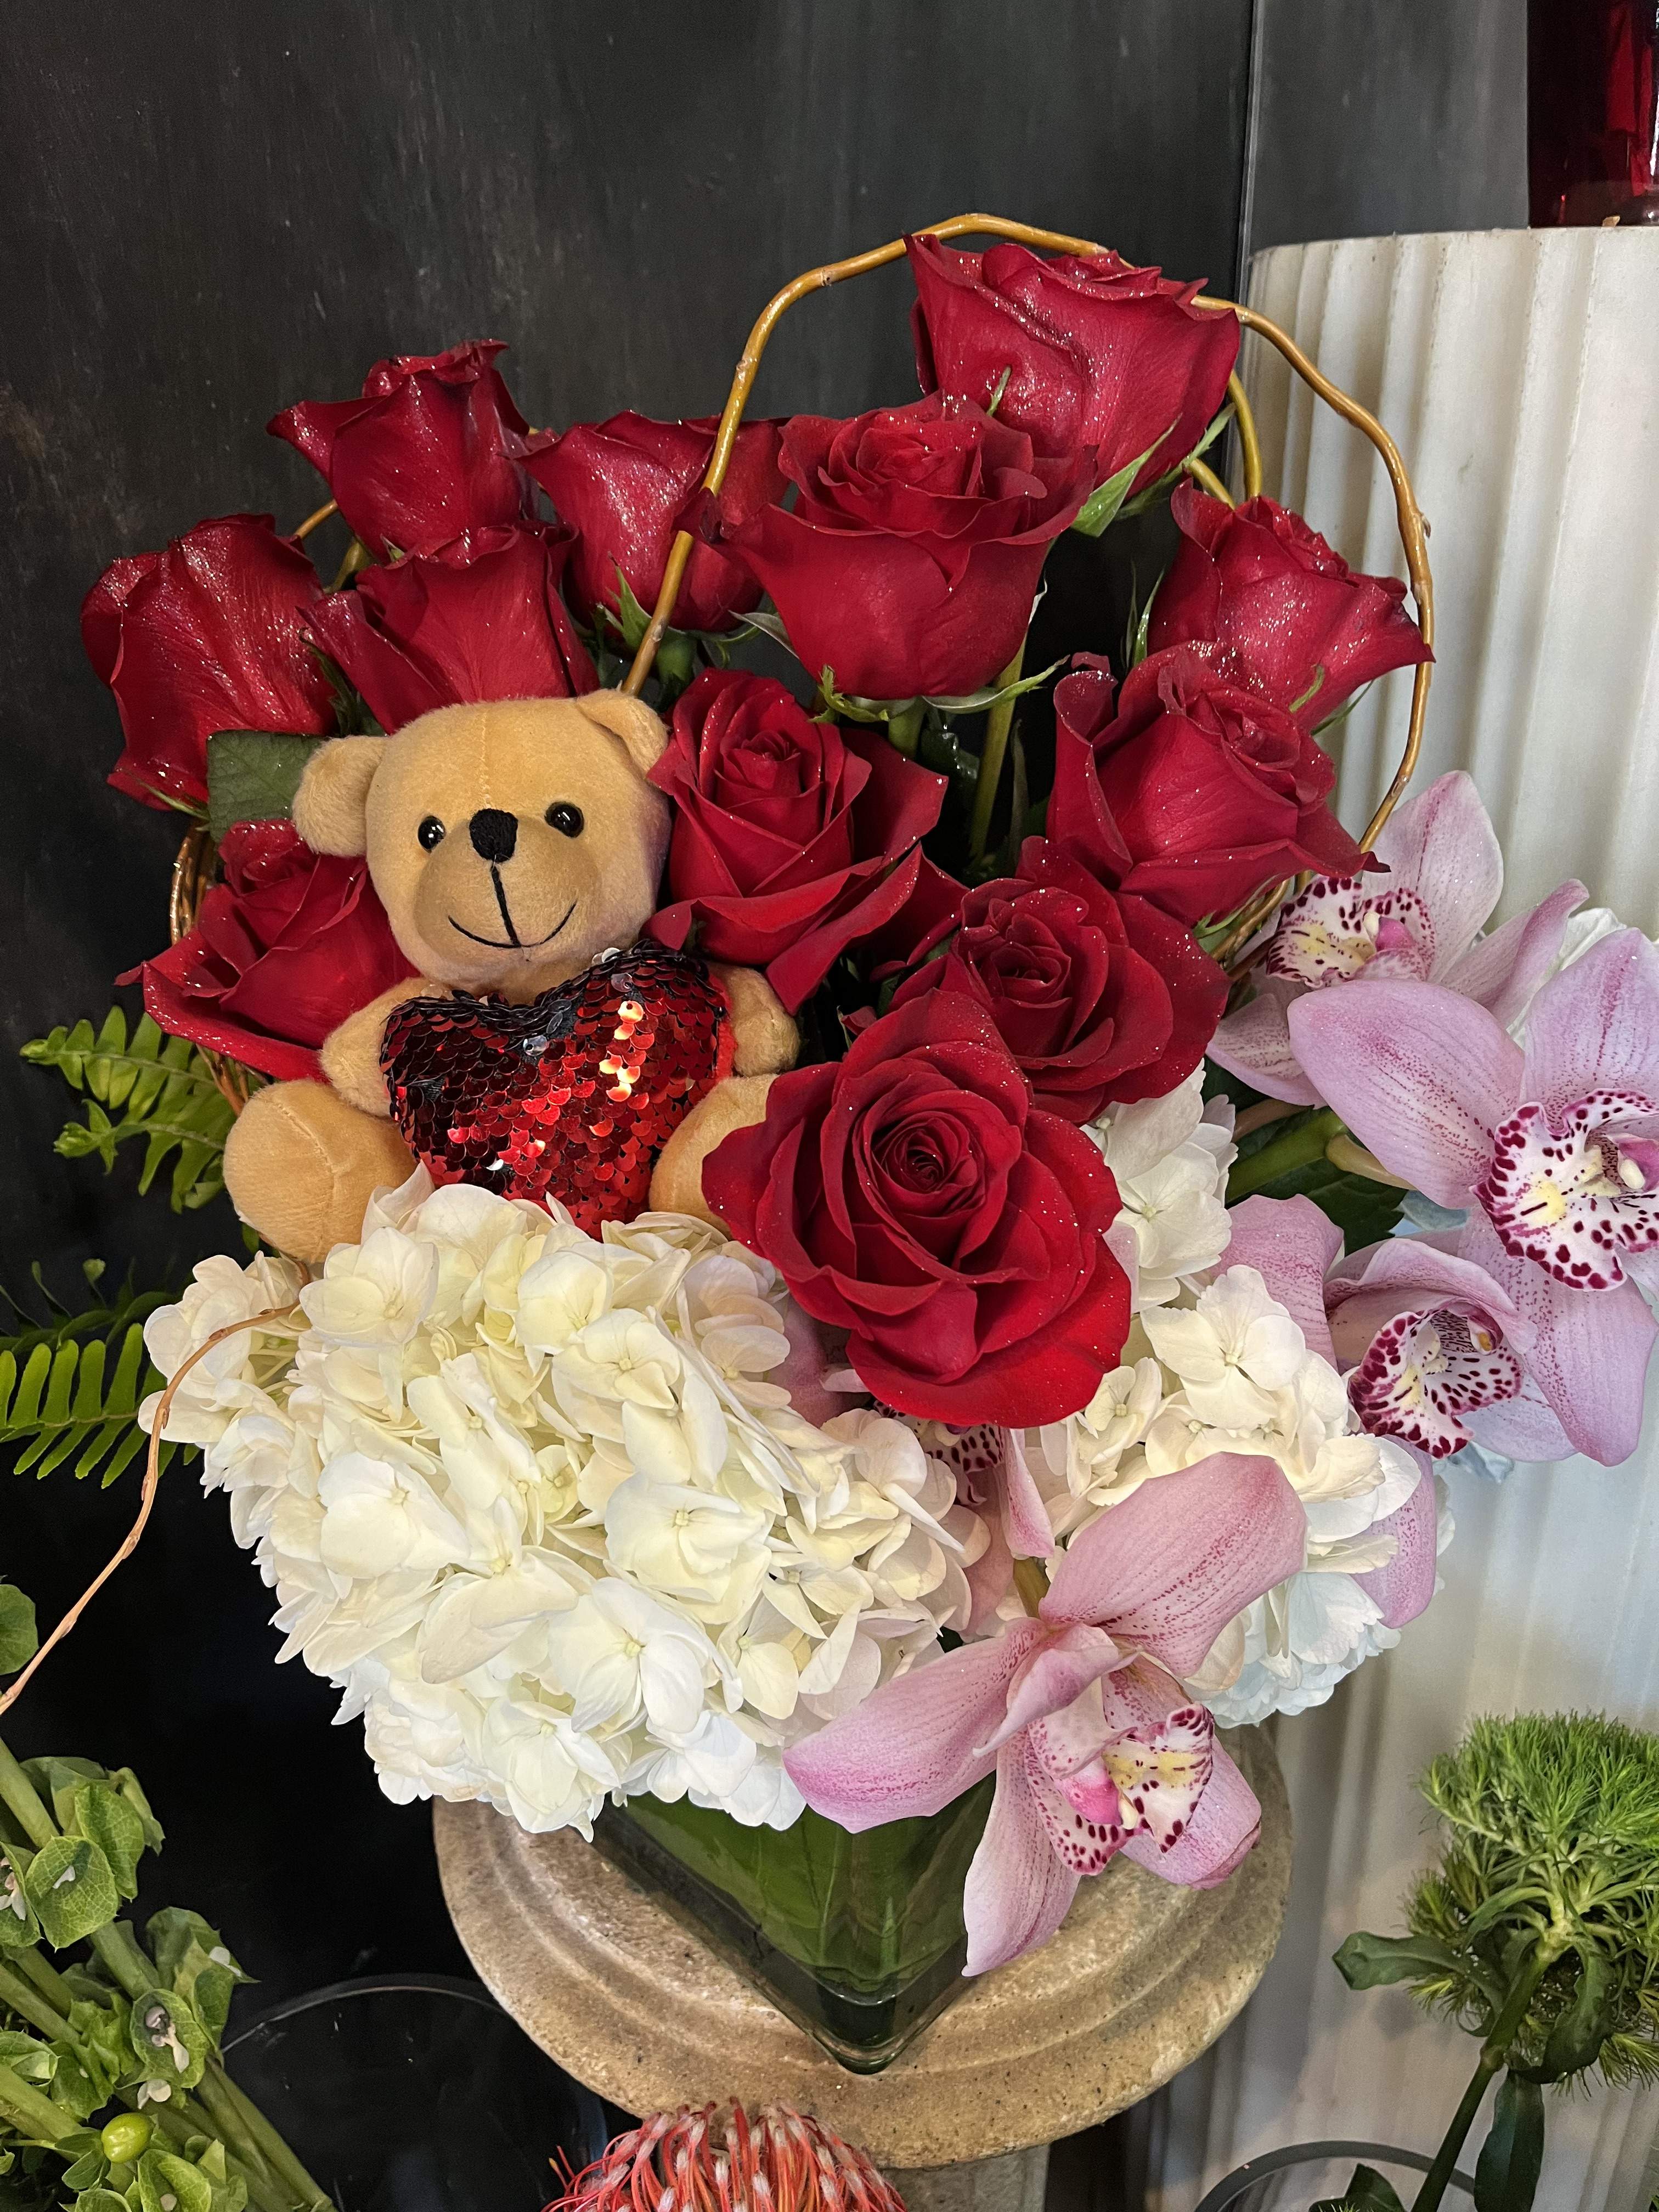 Sweet Hearts - Red Rose Dozen with Hydrangeas , Orchids and a Heart Bear 